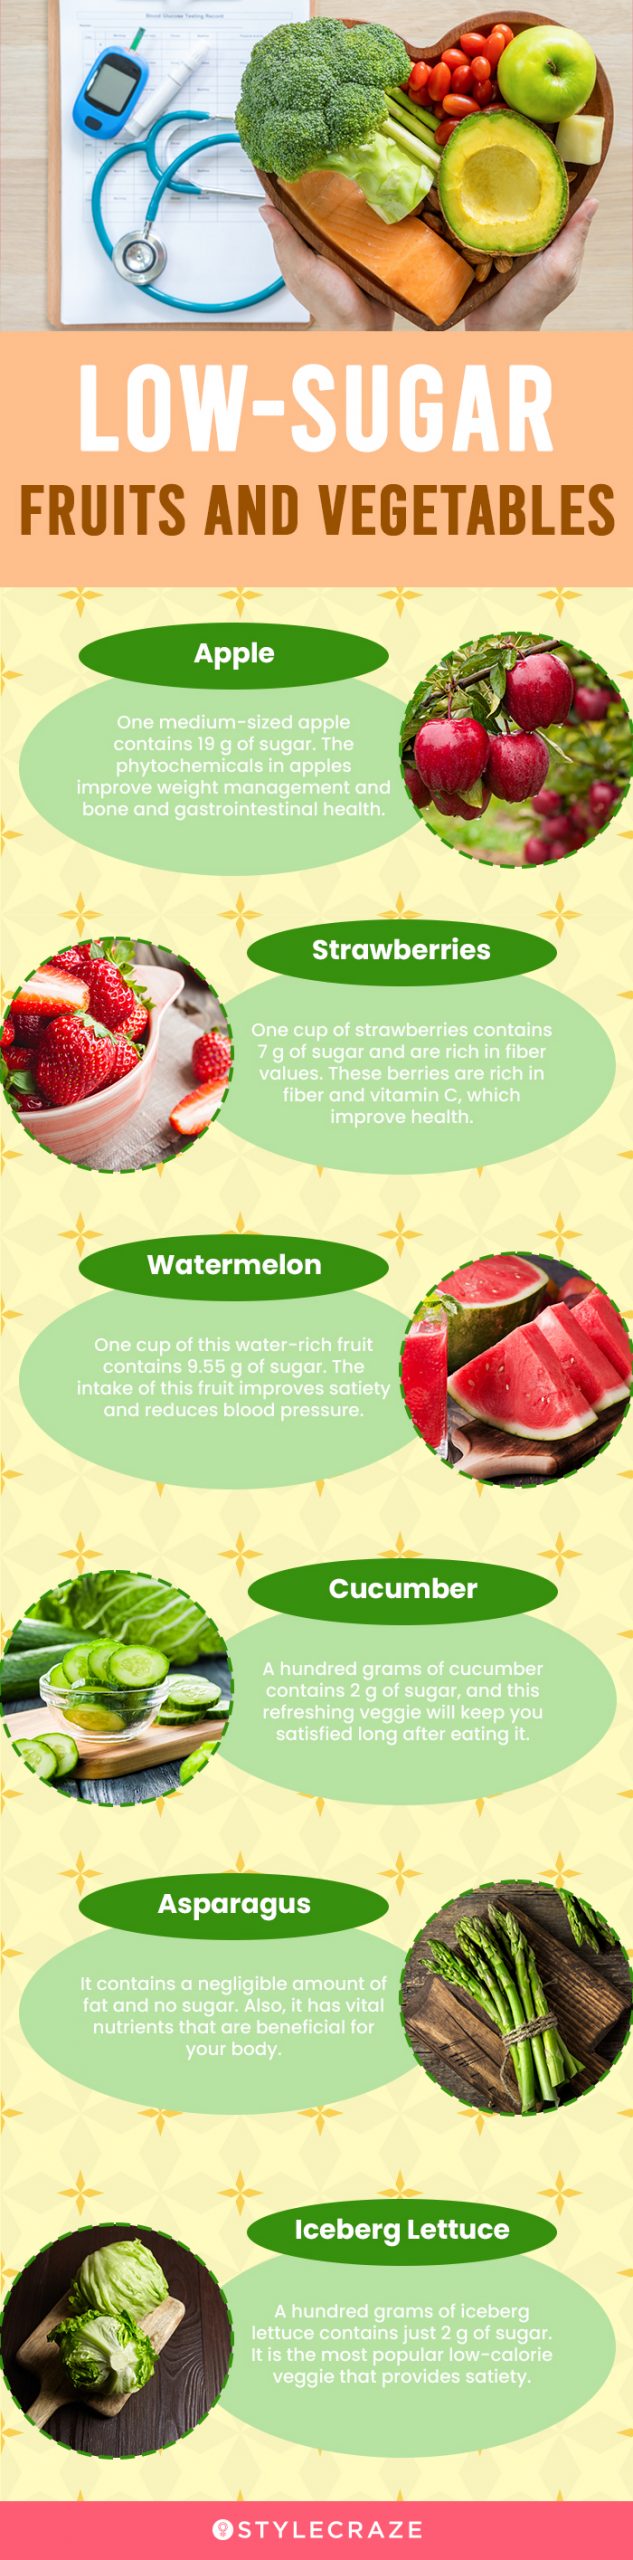 low sugar fruits and vegetables (infographic)